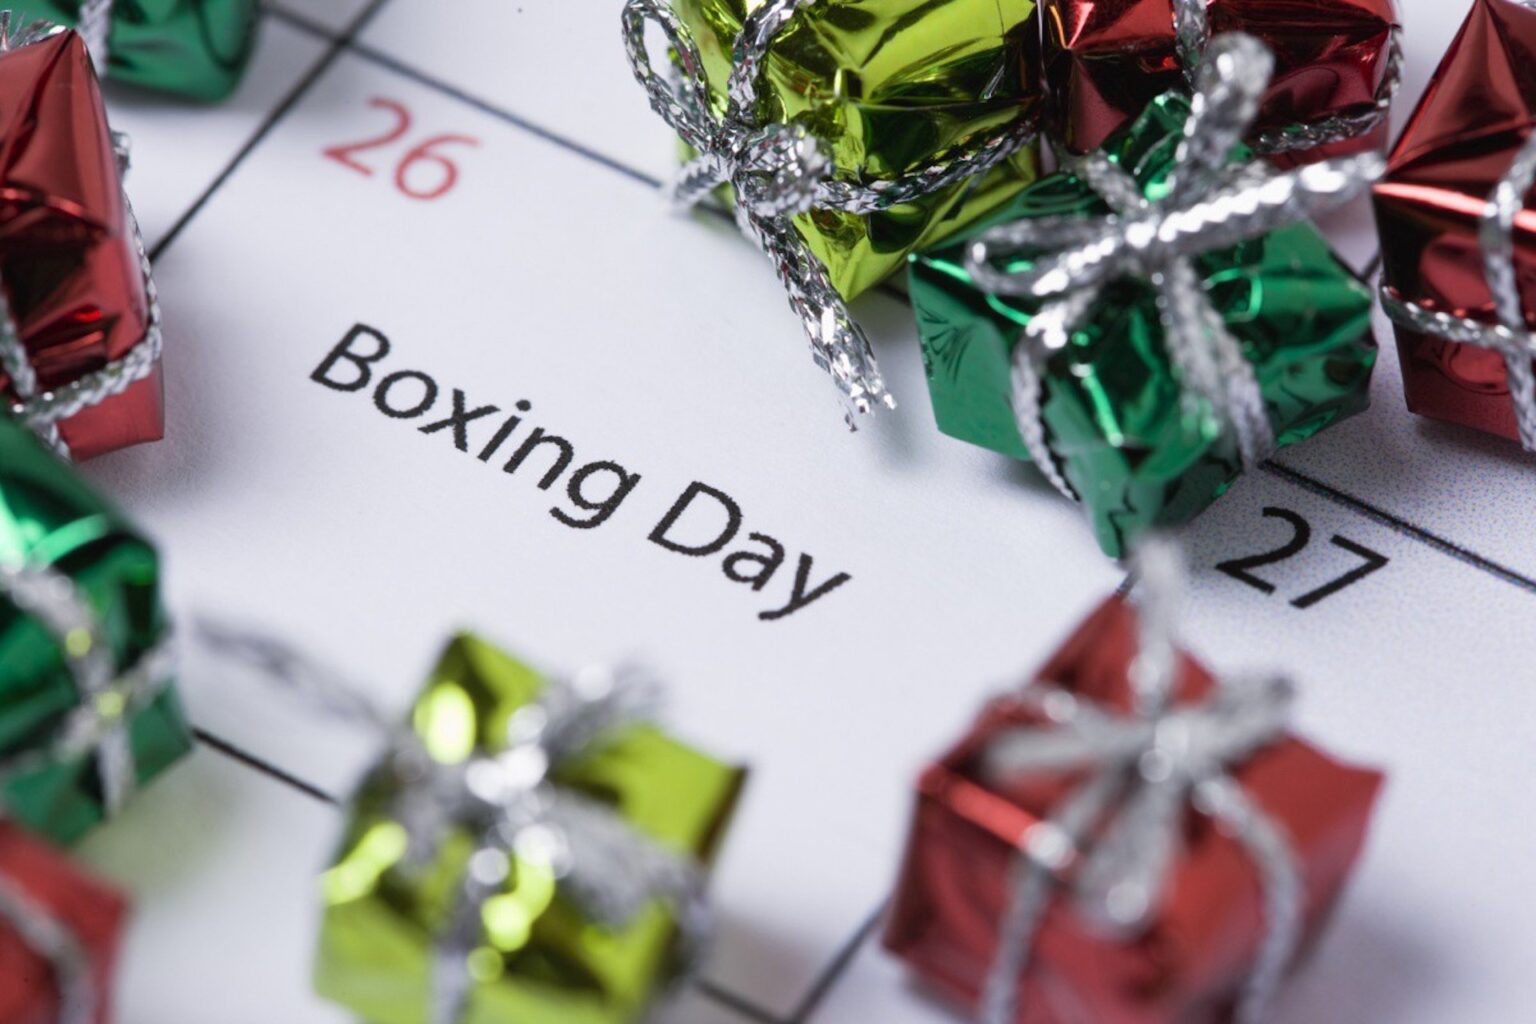 Wondering what Boxing Day is all about? Here's the history of the post-holiday event that everyone talks about.